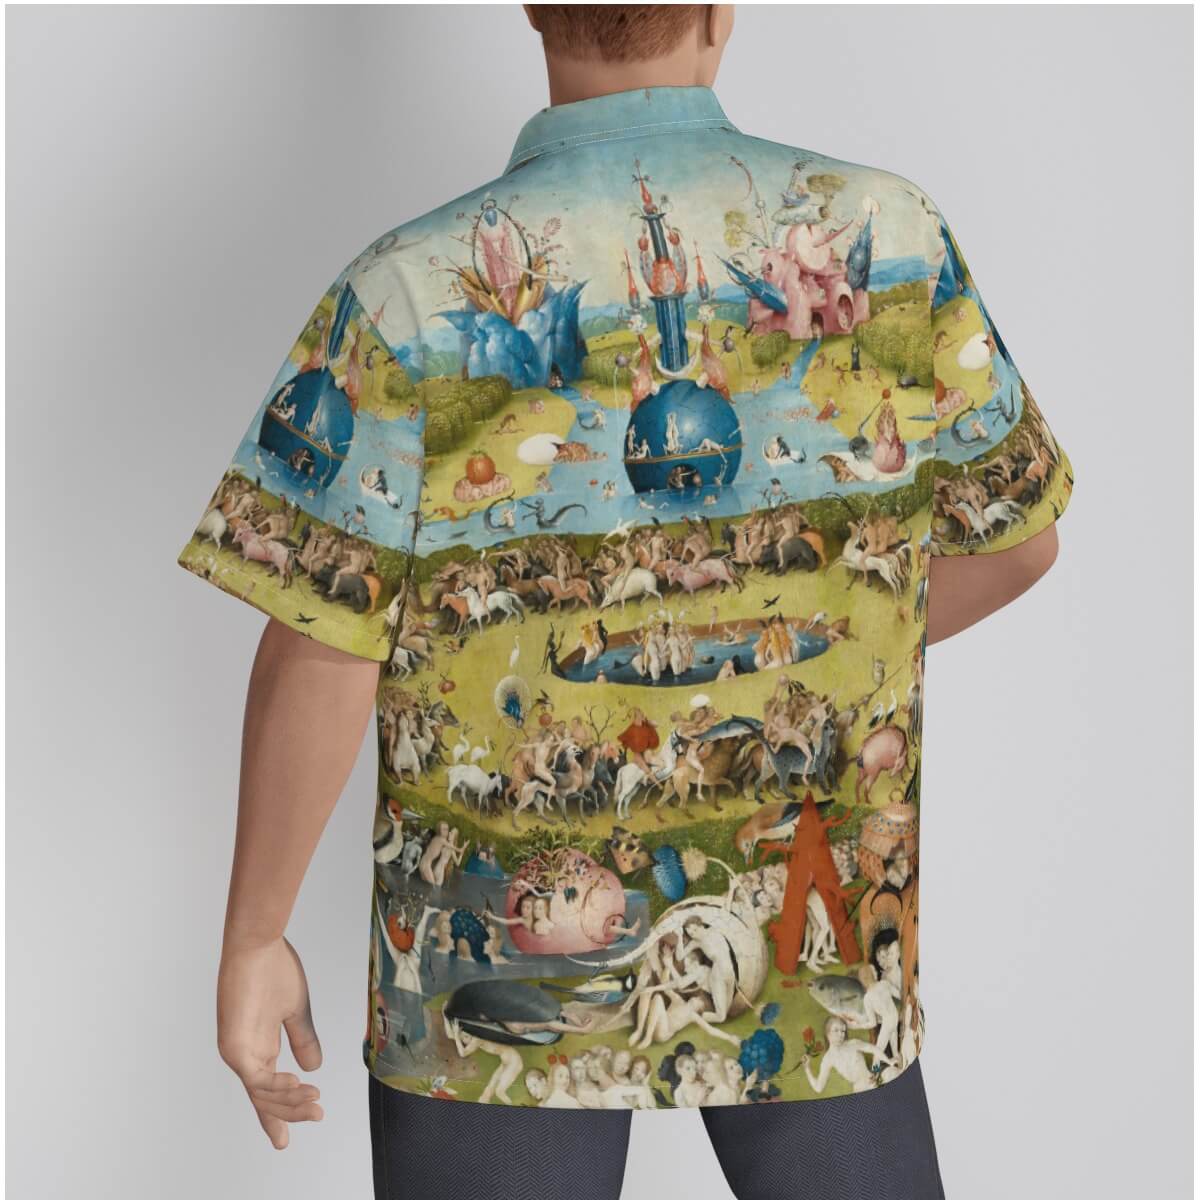 Artistic Clothing Inspired by Famous Painting